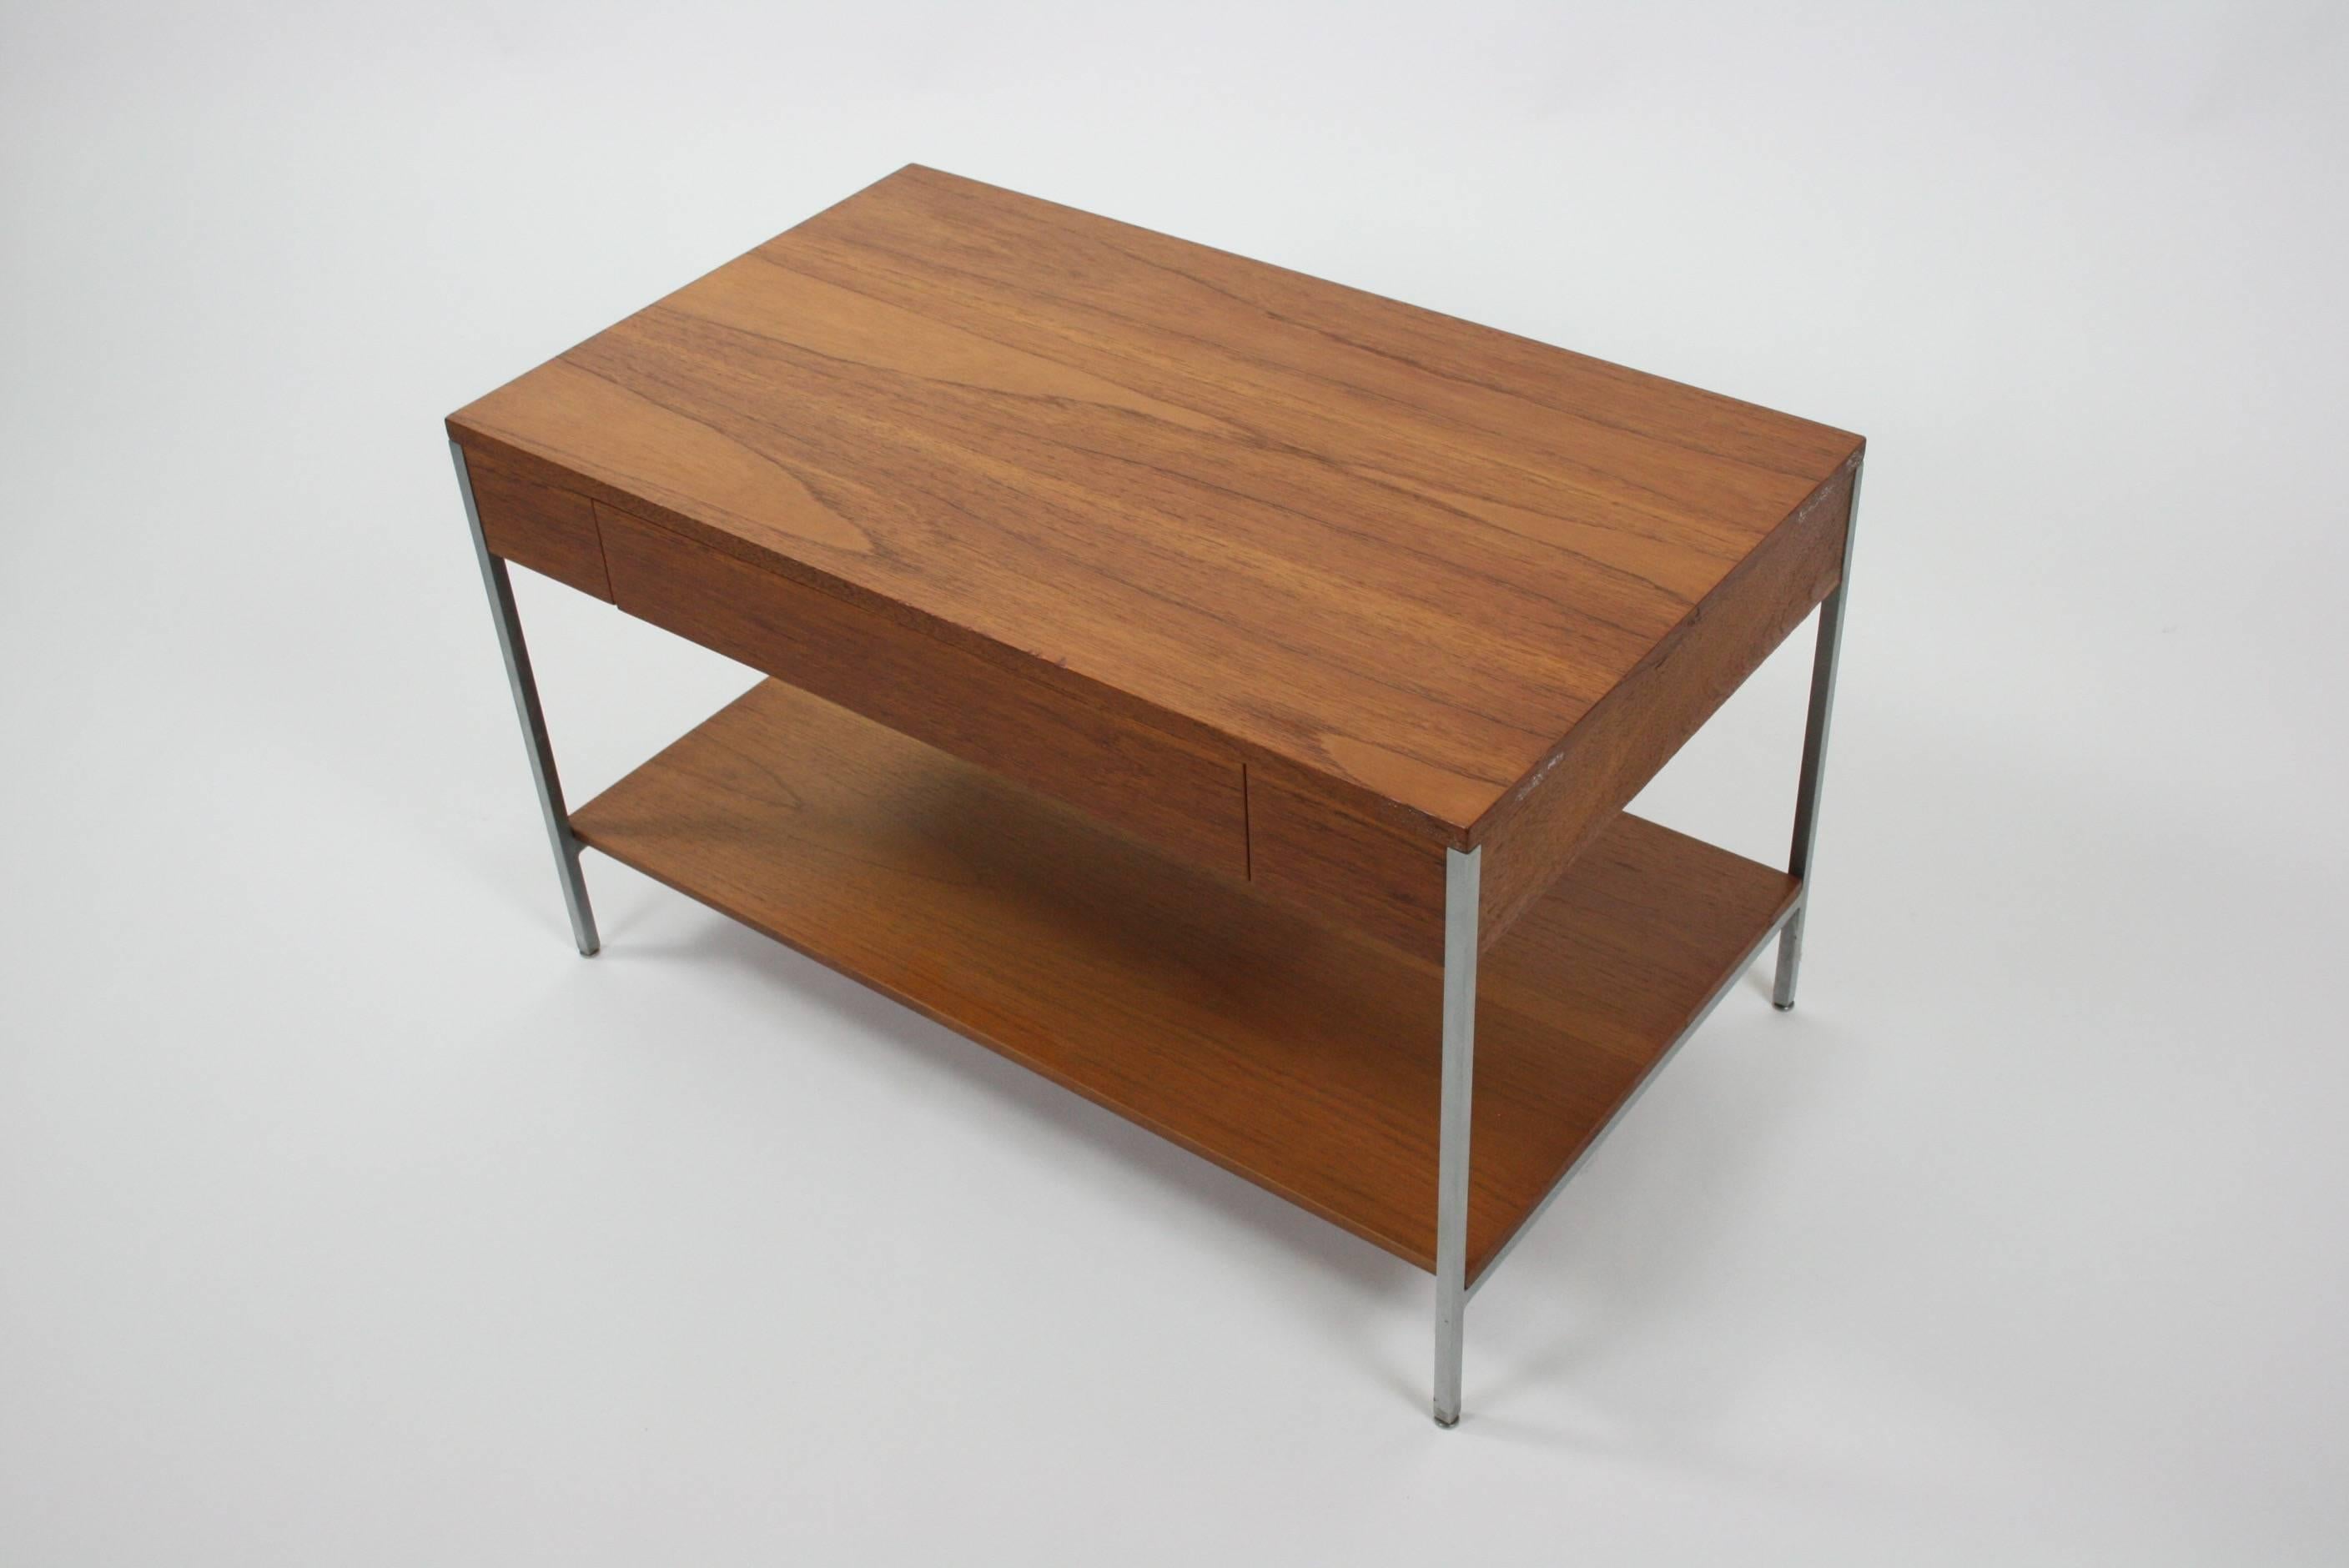 Exceptional all original finish side table with a drawer and laminated slide out tray table. The walnut case is held floating by a simple and subtle brushed steel frame. A shelf below for more storage. All original condition. Self leveling feet at